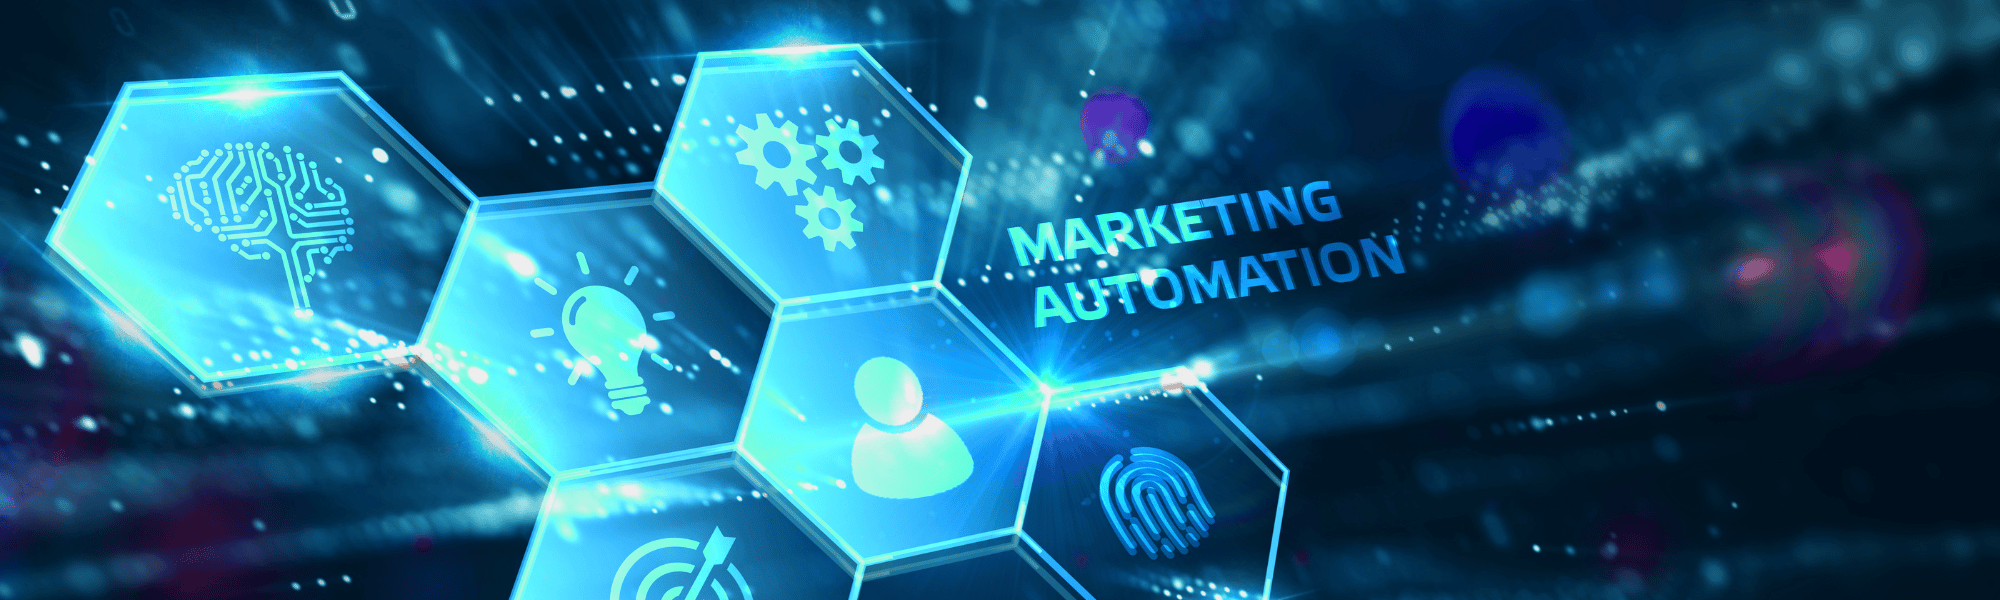 Marketing automation is a process that uses technology and software to automate the repetitive tasks associated with marketing campaigns.